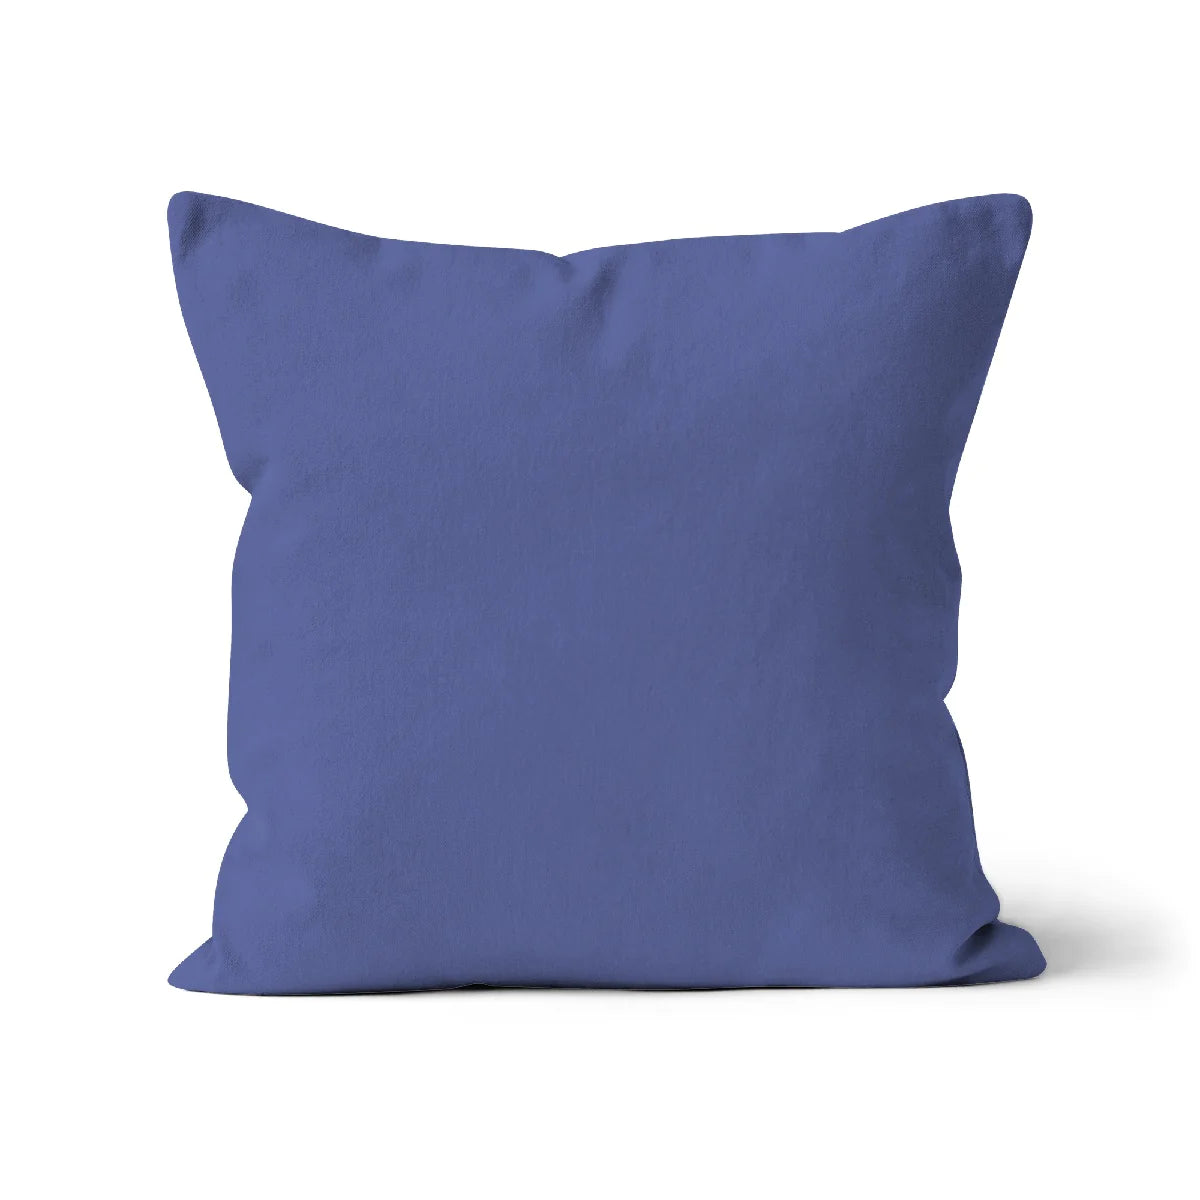 Sustainable and eco-friendly, this UK-made English Bluebell colour cushion cover is crafted from high-quality organic cotton. The unfilled nautical square shaped cushion cover in a beautiful plain blue hue makes it a versatile and stylish addition to any interior theme. Machine washable for easy cleaning, this cushion cover is a perfect choice for those seeking plain colour options for their sustainable homeware collection